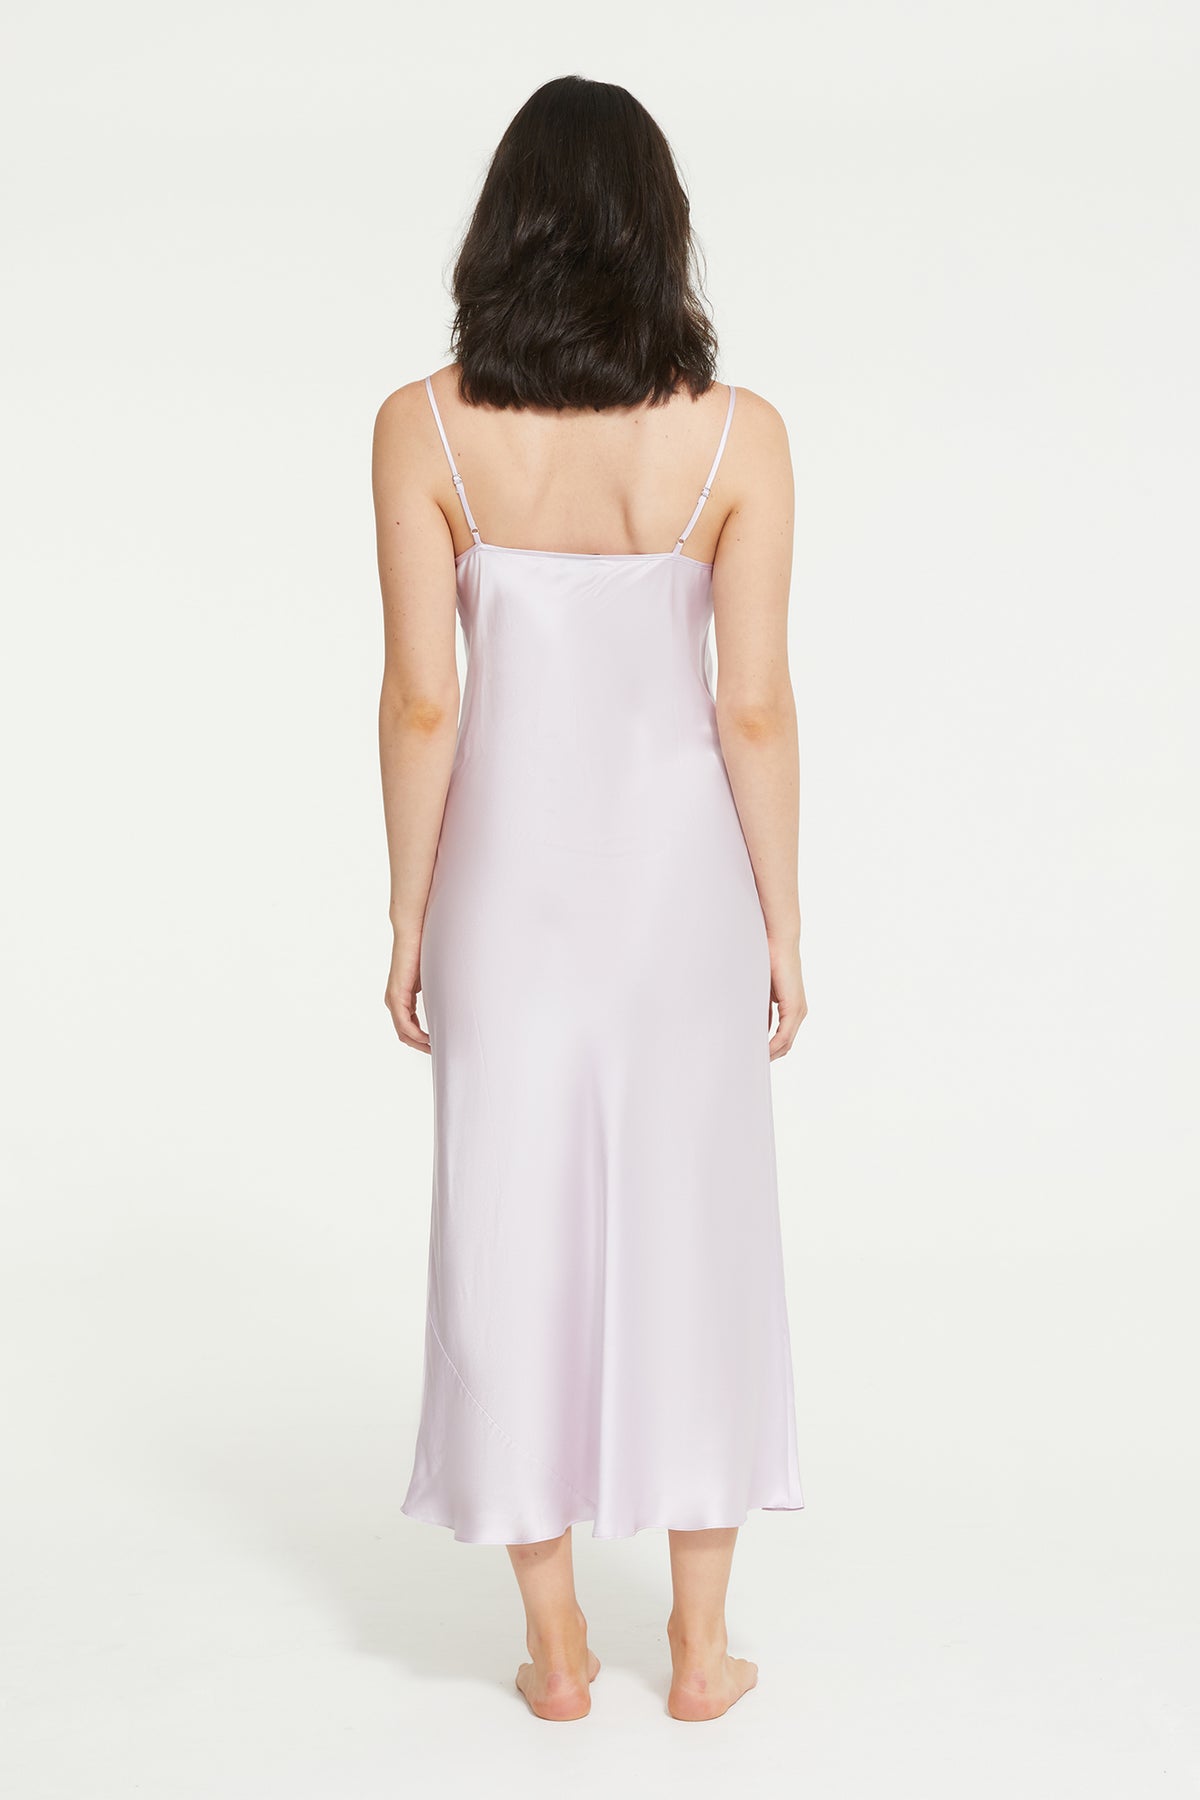 The Silk Lace Slip in Soft Lilac - 100% Silk by Ginia